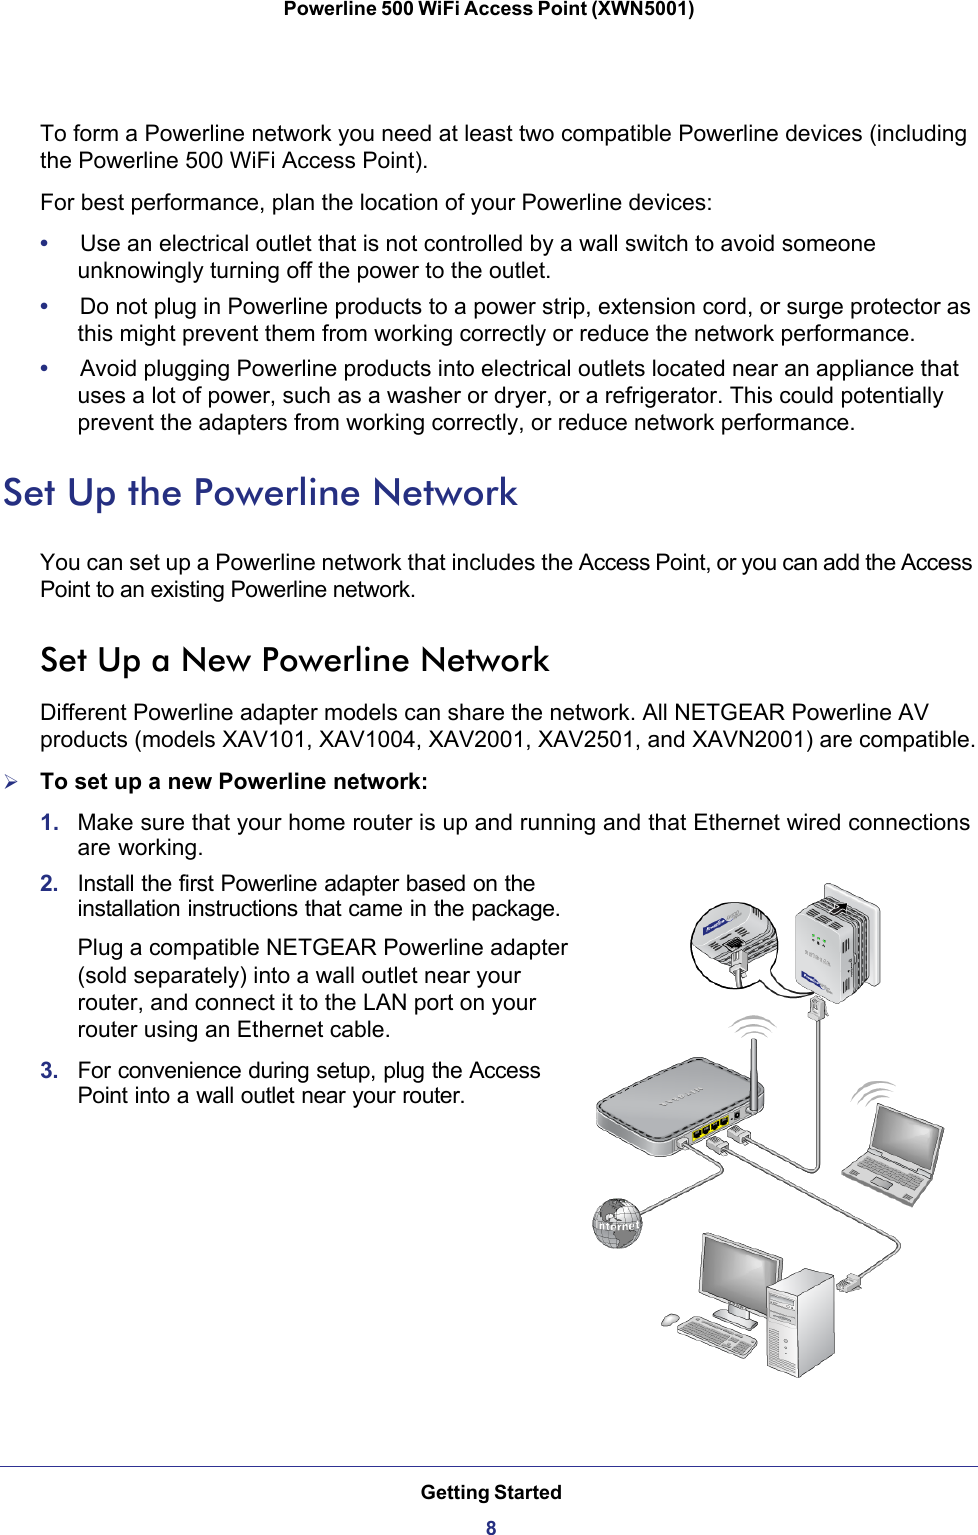 Getting Started8Powerline 500 WiFi Access Point (XWN5001) To form a Powerline network you need at least two compatible Powerline devices (including the Powerline 500 WiFi Access Point).For best performance, plan the location of your Powerline devices:•     Use an electrical outlet that is not controlled by a wall switch to avoid someone unknowingly turning off the power to the outlet.•     Do not plug in Powerline products to a power strip, extension cord, or surge protector as this might prevent them from working correctly or reduce the network performance.•     Avoid plugging Powerline products into electrical outlets located near an appliance that uses a lot of power, such as a washer or dryer, or a refrigerator. This could potentially prevent the adapters from working correctly, or reduce network performance. Set Up the Powerline NetworkYou can set up a Powerline network that includes the Access Point, or you can add the Access Point to an existing Powerline network. Set Up a New Powerline NetworkDifferent Powerline adapter models can share the network. All NETGEAR Powerline AV products (models XAV101, XAV1004, XAV2001, XAV2501, and XAVN2001) are compatible.To set up a new Powerline network:1.  Make sure that your home router is up and running and that Ethernet wired connections are working.2.  Install the first Powerline adapter based on the installation instructions that came in the package. Plug a compatible NETGEAR Powerline adapter (sold separately) into a wall outlet near your router, and connect it to the LAN port on your router using an Ethernet cable. 3.  For convenience during setup, plug the Access Point into a wall outlet near your router. 